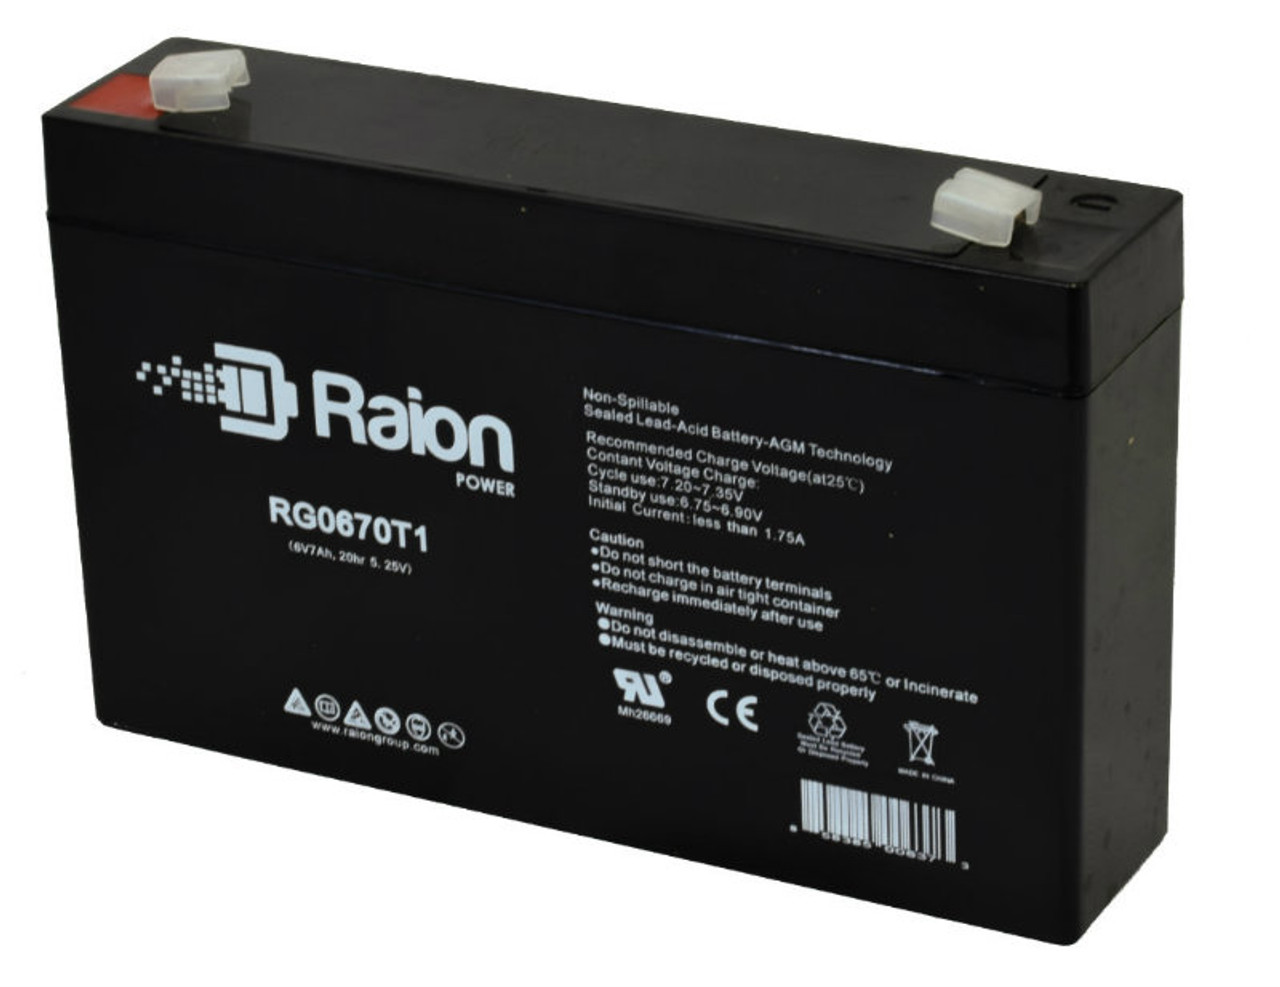 Raion Power RG0670T1 Replacement Battery for PM PM670 OEM Battery